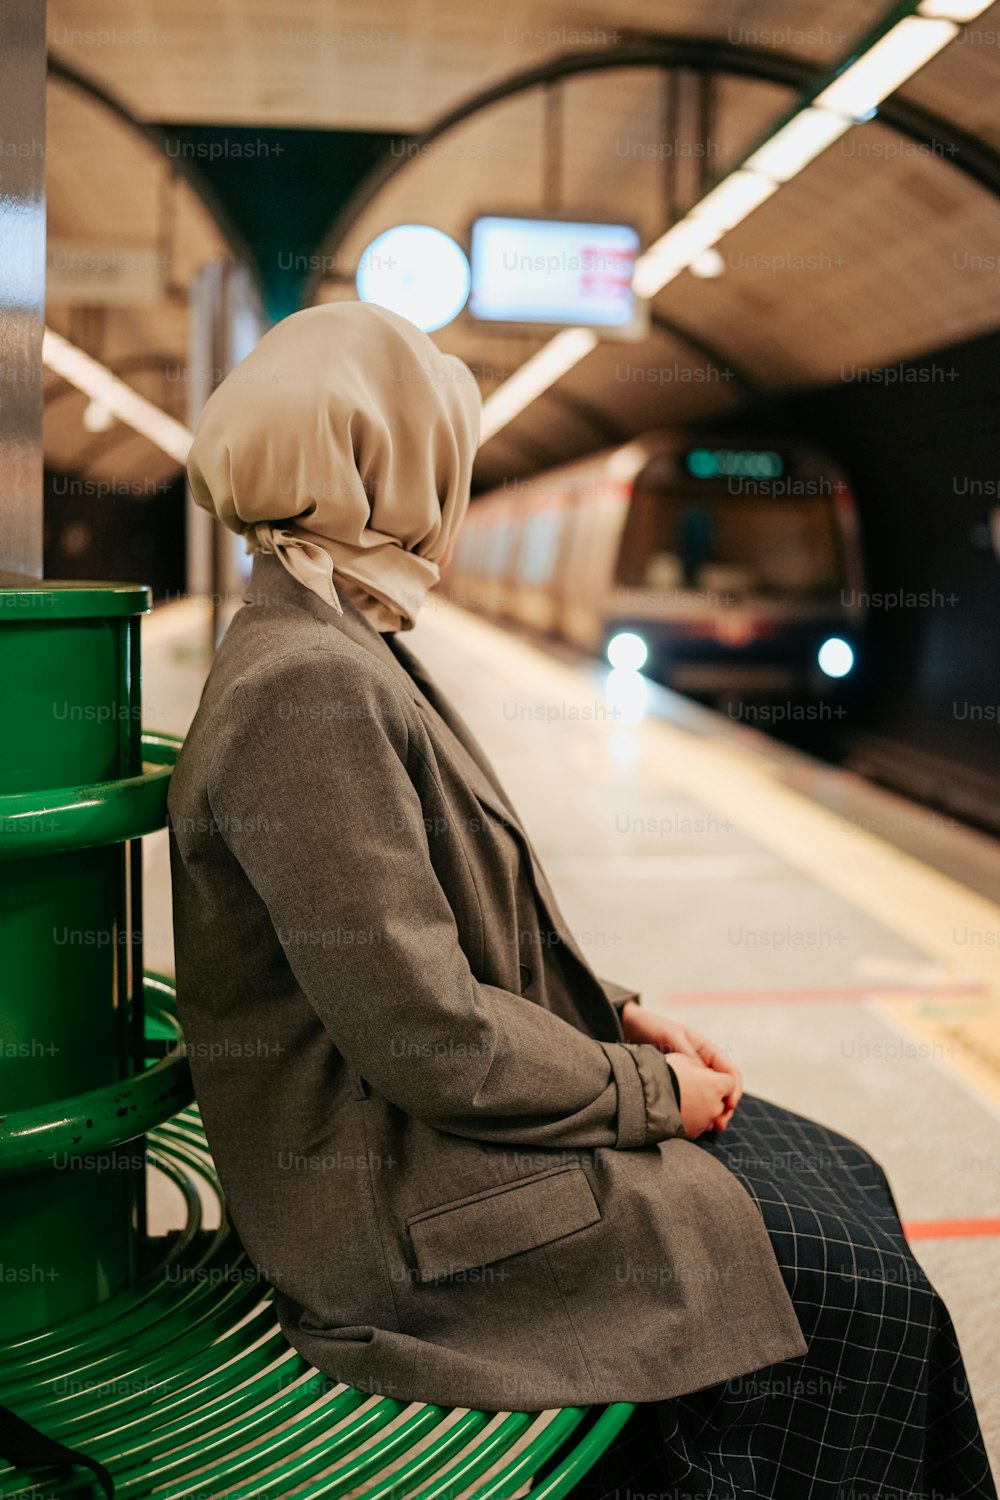 a woman sitting on a bench in a subway station